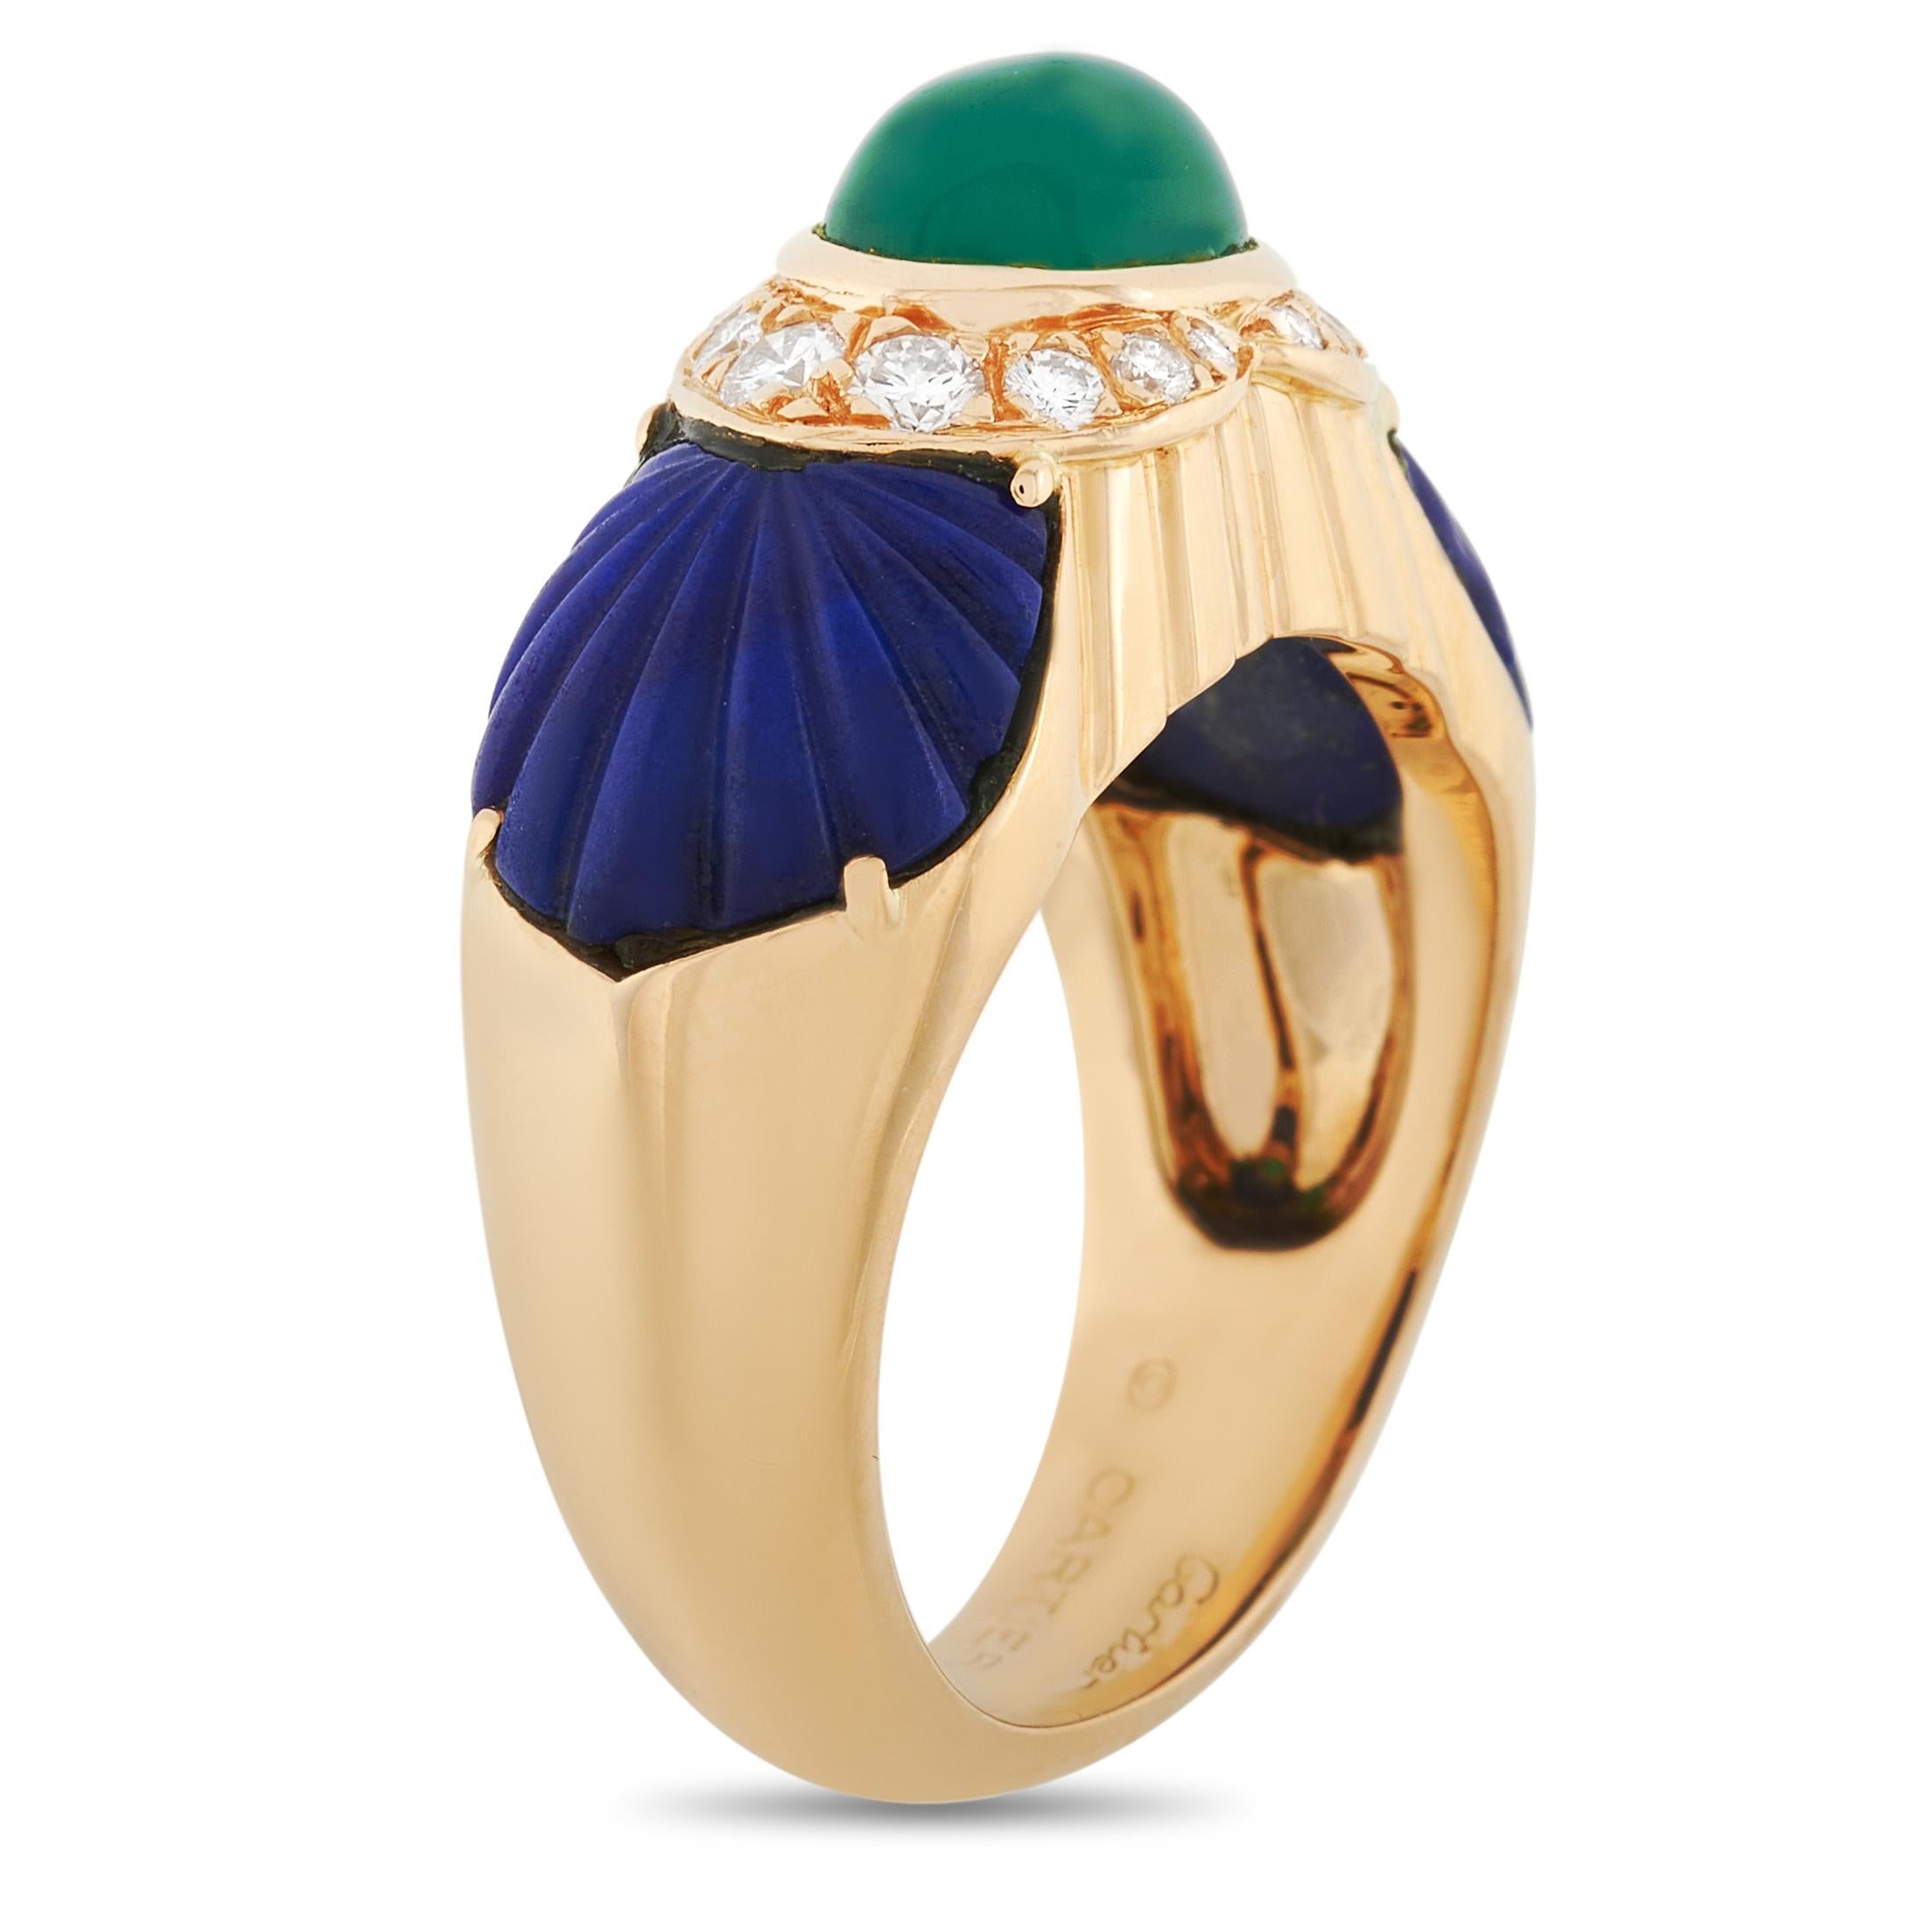 Lapis lazuli defines this 18K yellow gold ring. For a hint of sparkle, white diamonds frame the center green chrysoprase. One can't help but be attracted to the playful yet classy vibe of this piece.
 
 The Cartier 18K Yellow Gold Diamond,